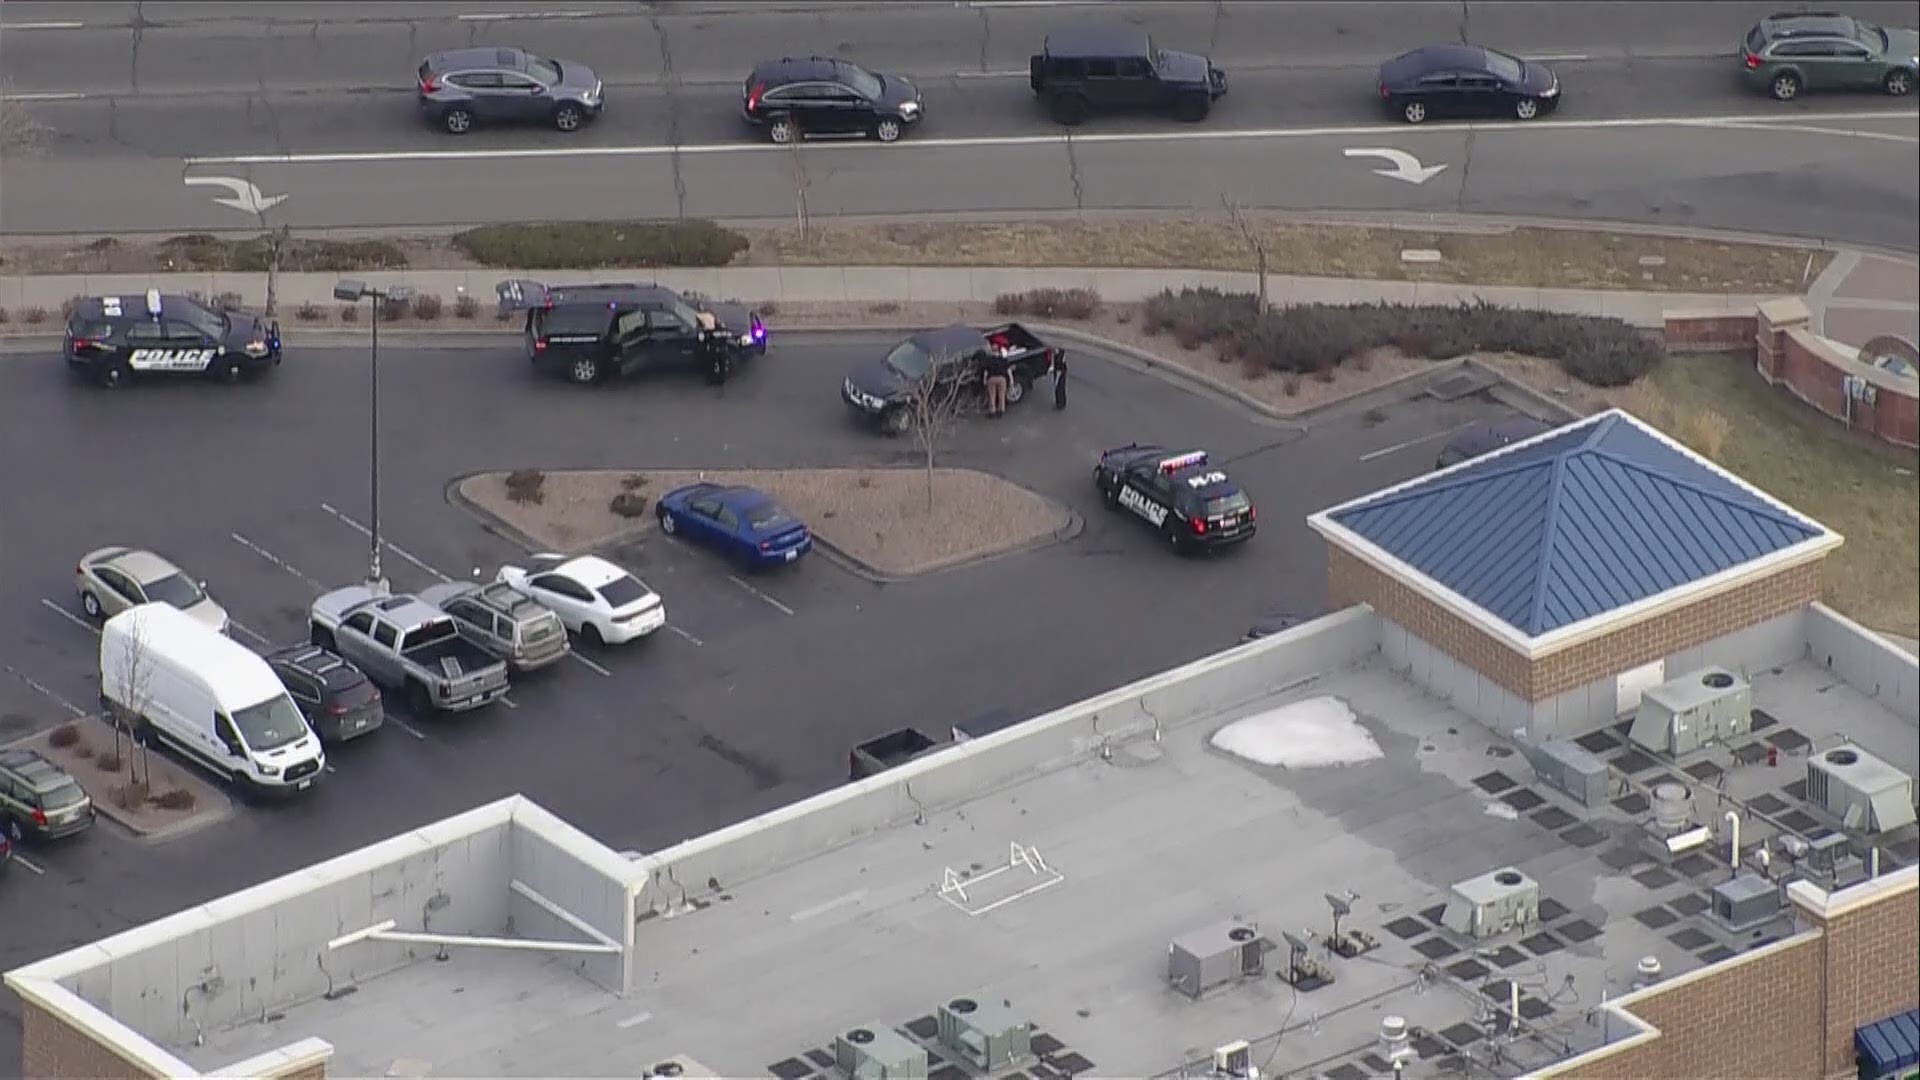 Police said 4 juveniles are in custody following a stolen vehicle pursuit that ended near 53rd Avenue and Wadsworth Boulevard.